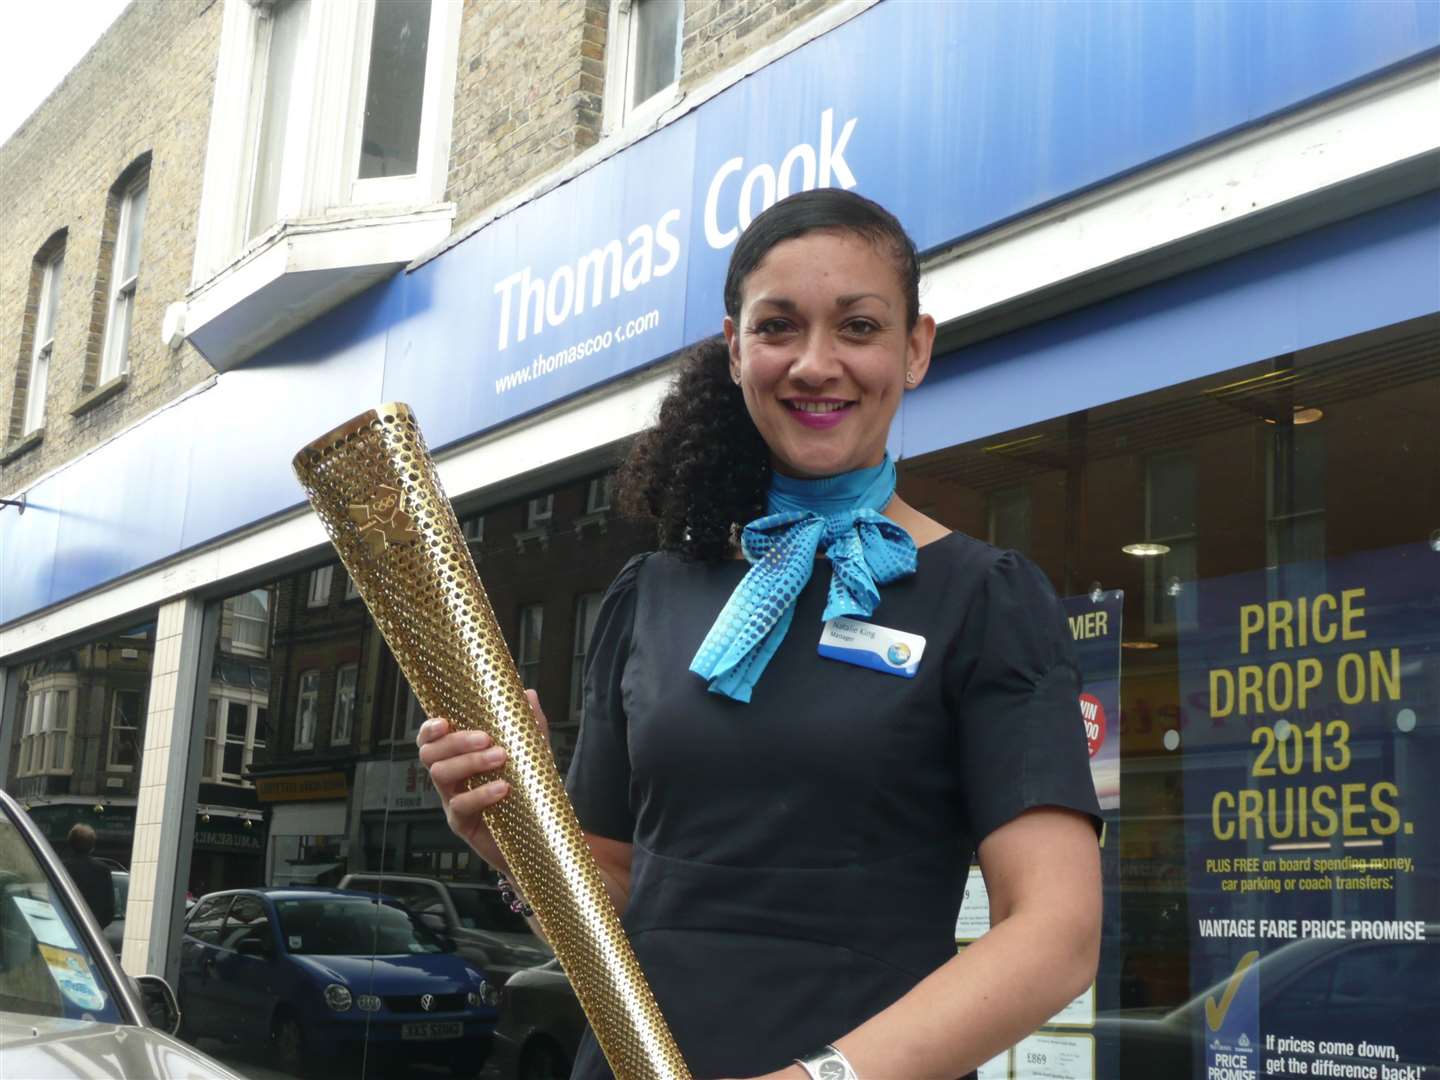 Natalie King, manager of Thomas Cook in Dover, with her Olympic torch